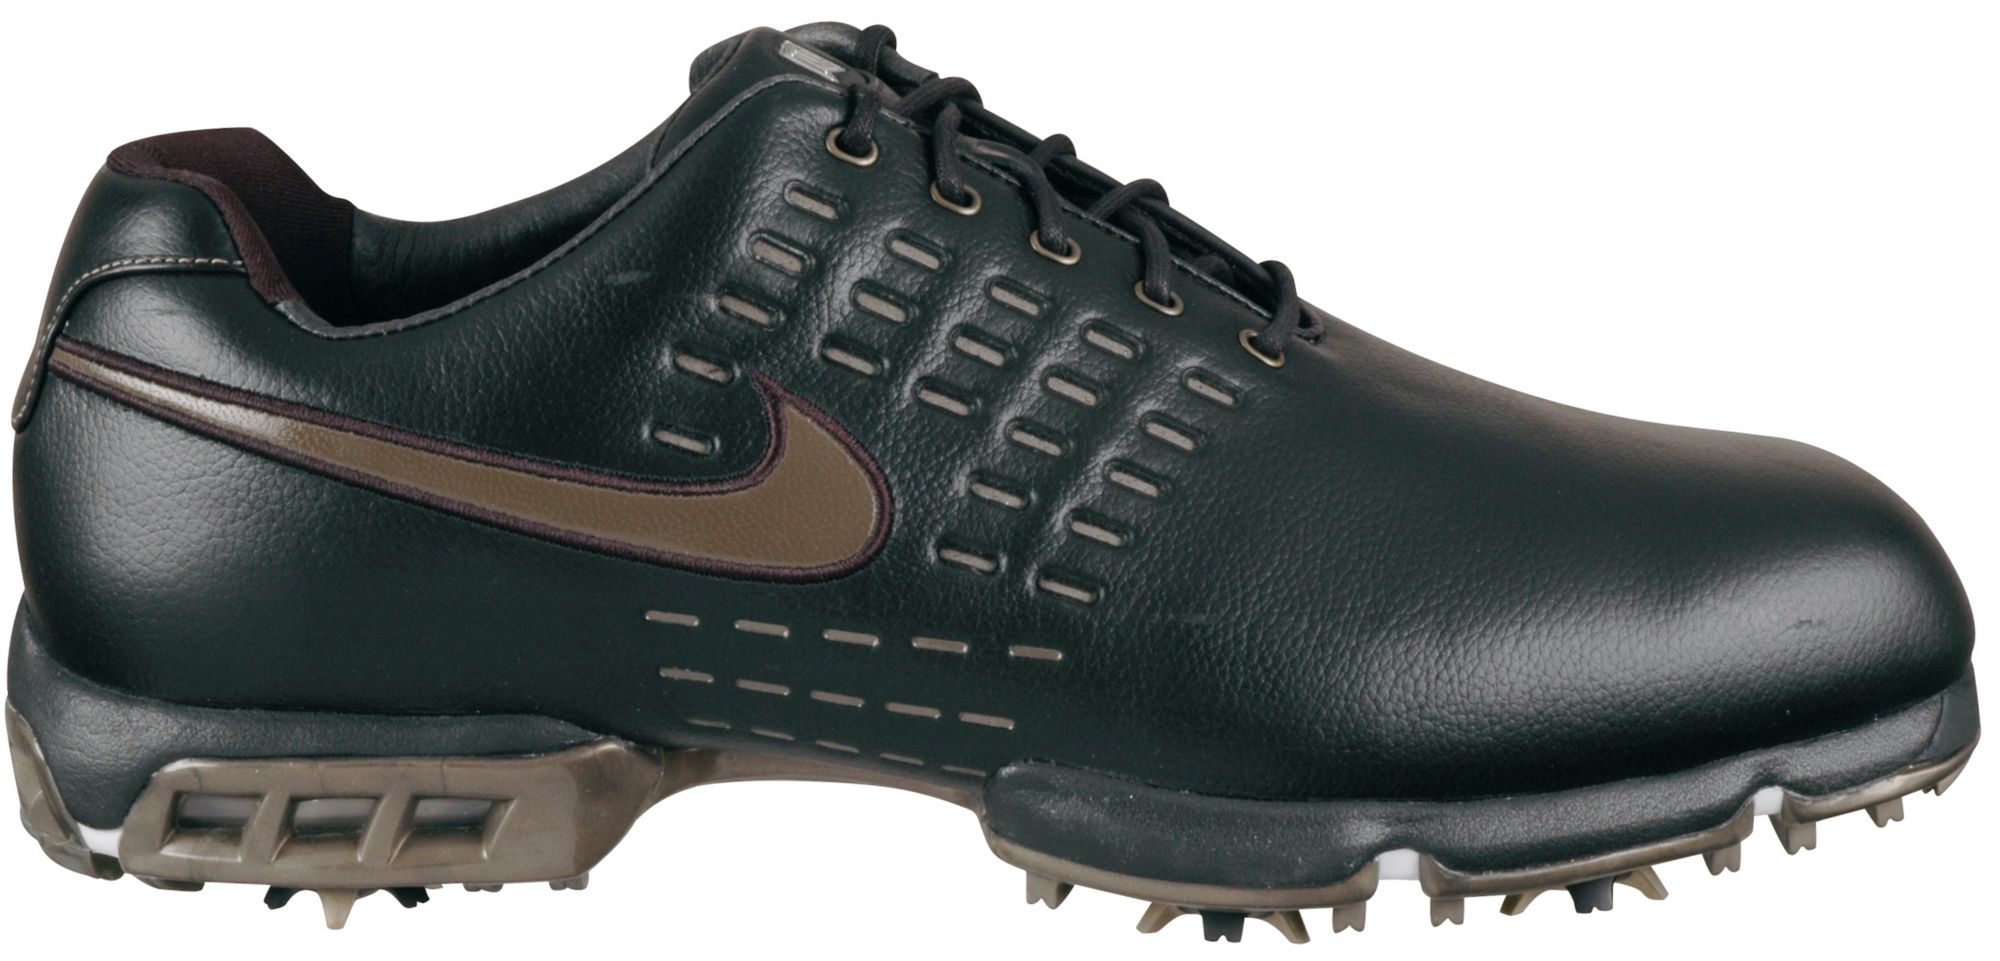 Power Walk Shoes on Tour Black Bronze Shoe Walk A Round In Tiger S New Shoes Featuring The